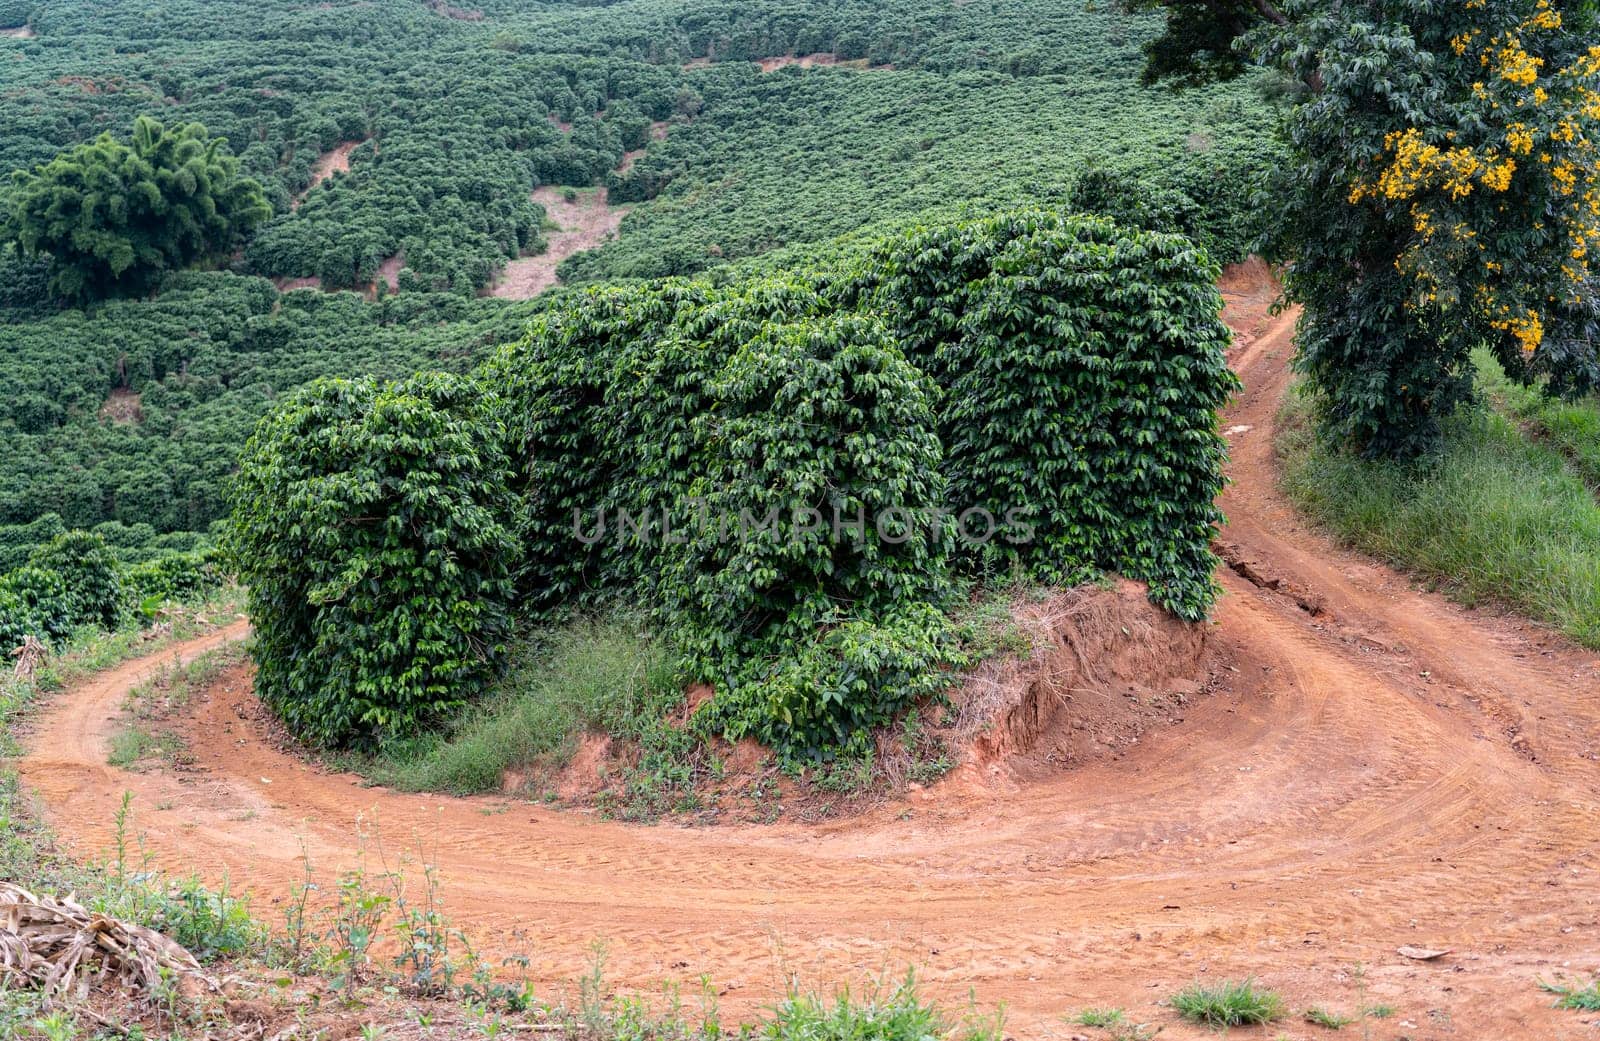 Take a walk through the lush green coffee plantations on the mountainside. The winding dirt road disappears between the rows of coffee trees, creating a picturesque rural scene.